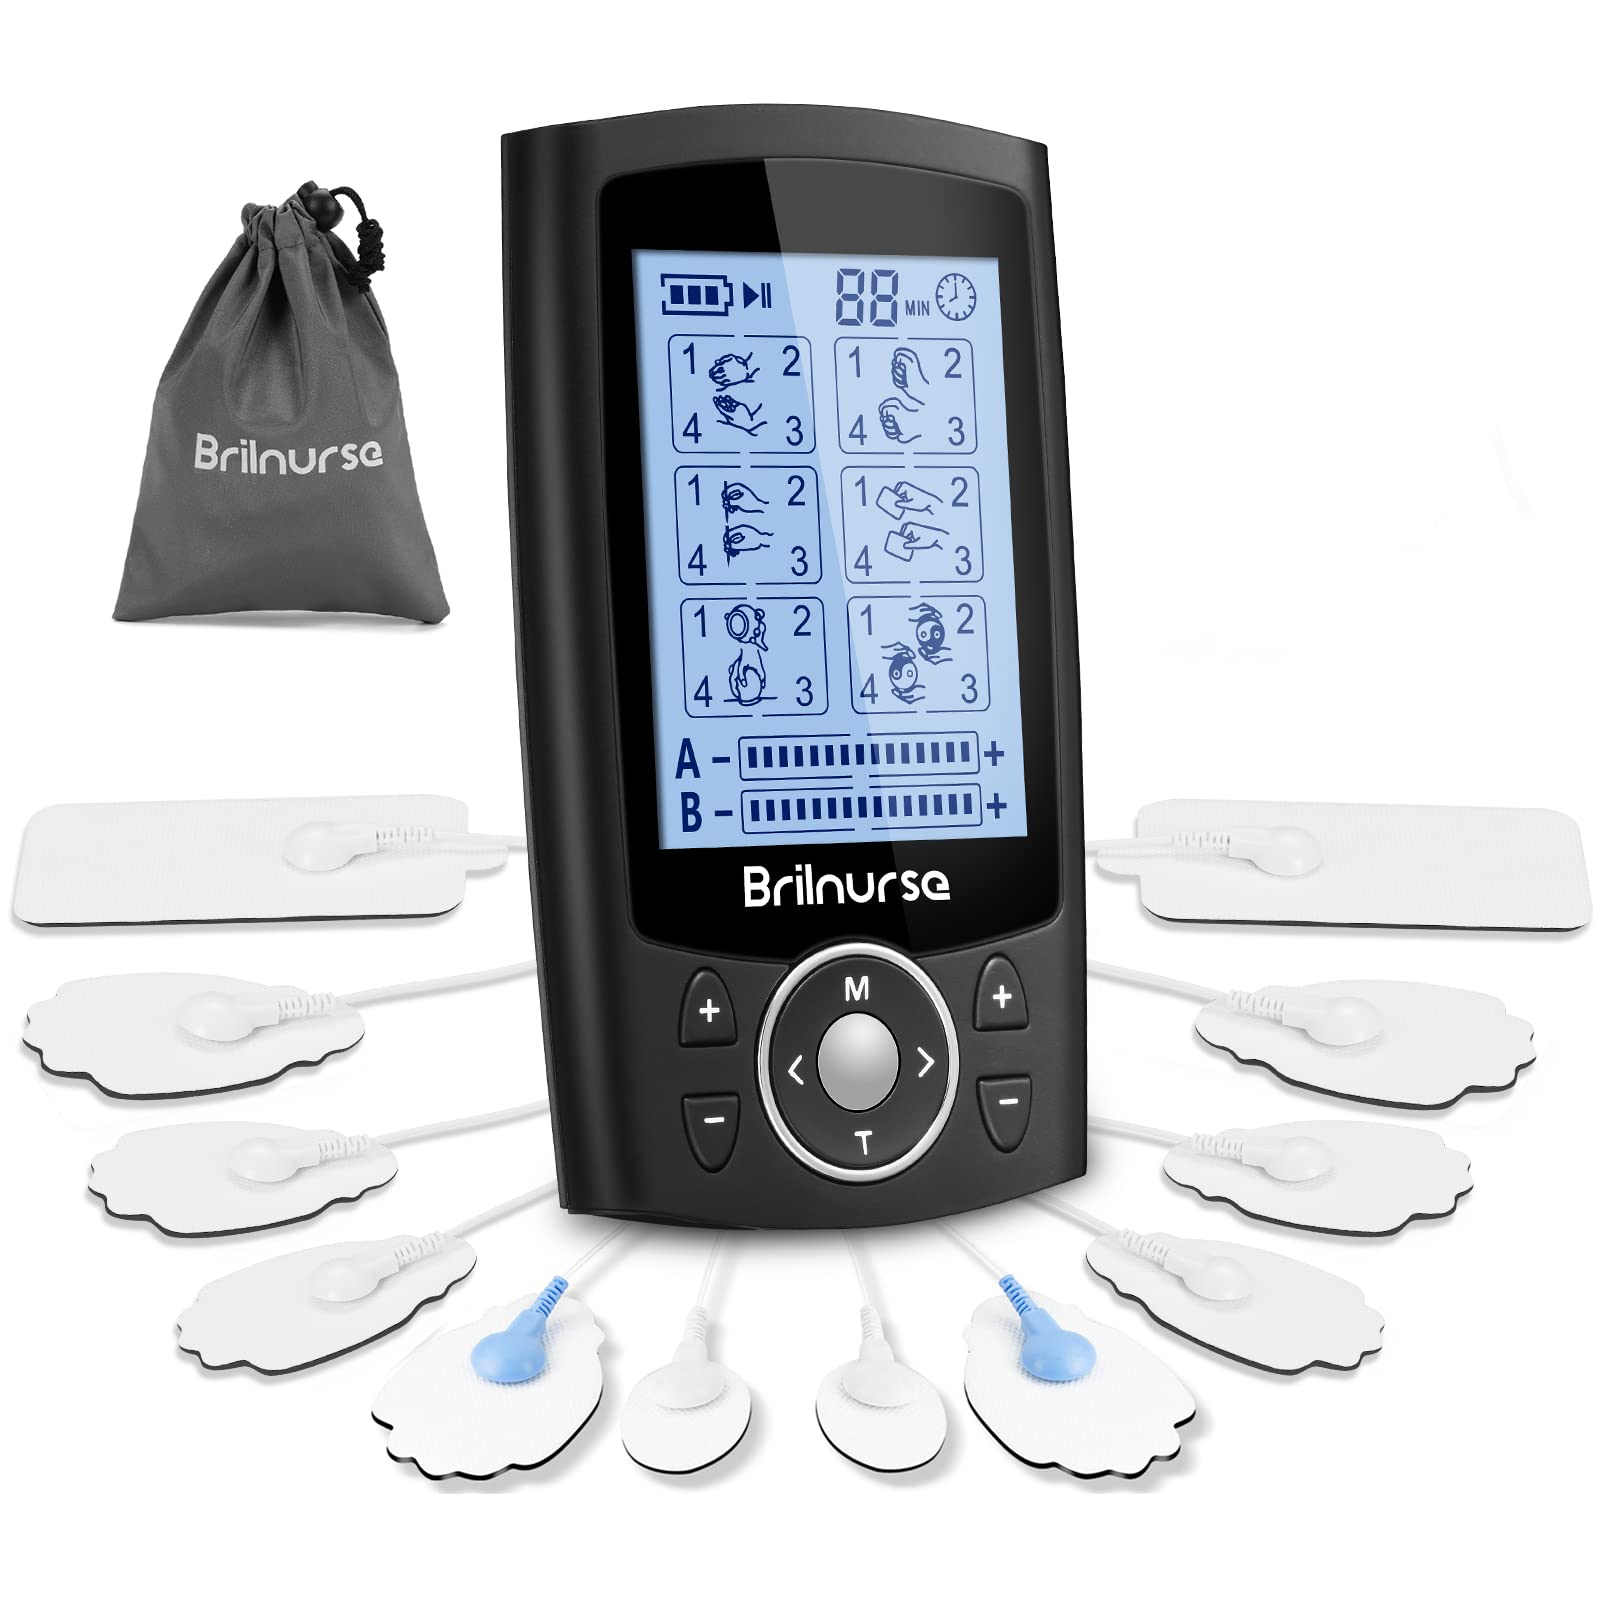 4 Outputs TENS Unit Muscle Stimulator Machine: Easy@Home 24 Modes  Rechargeable EMS Electric Pulse Massager | Electric TENS Machine - Pain  Relief